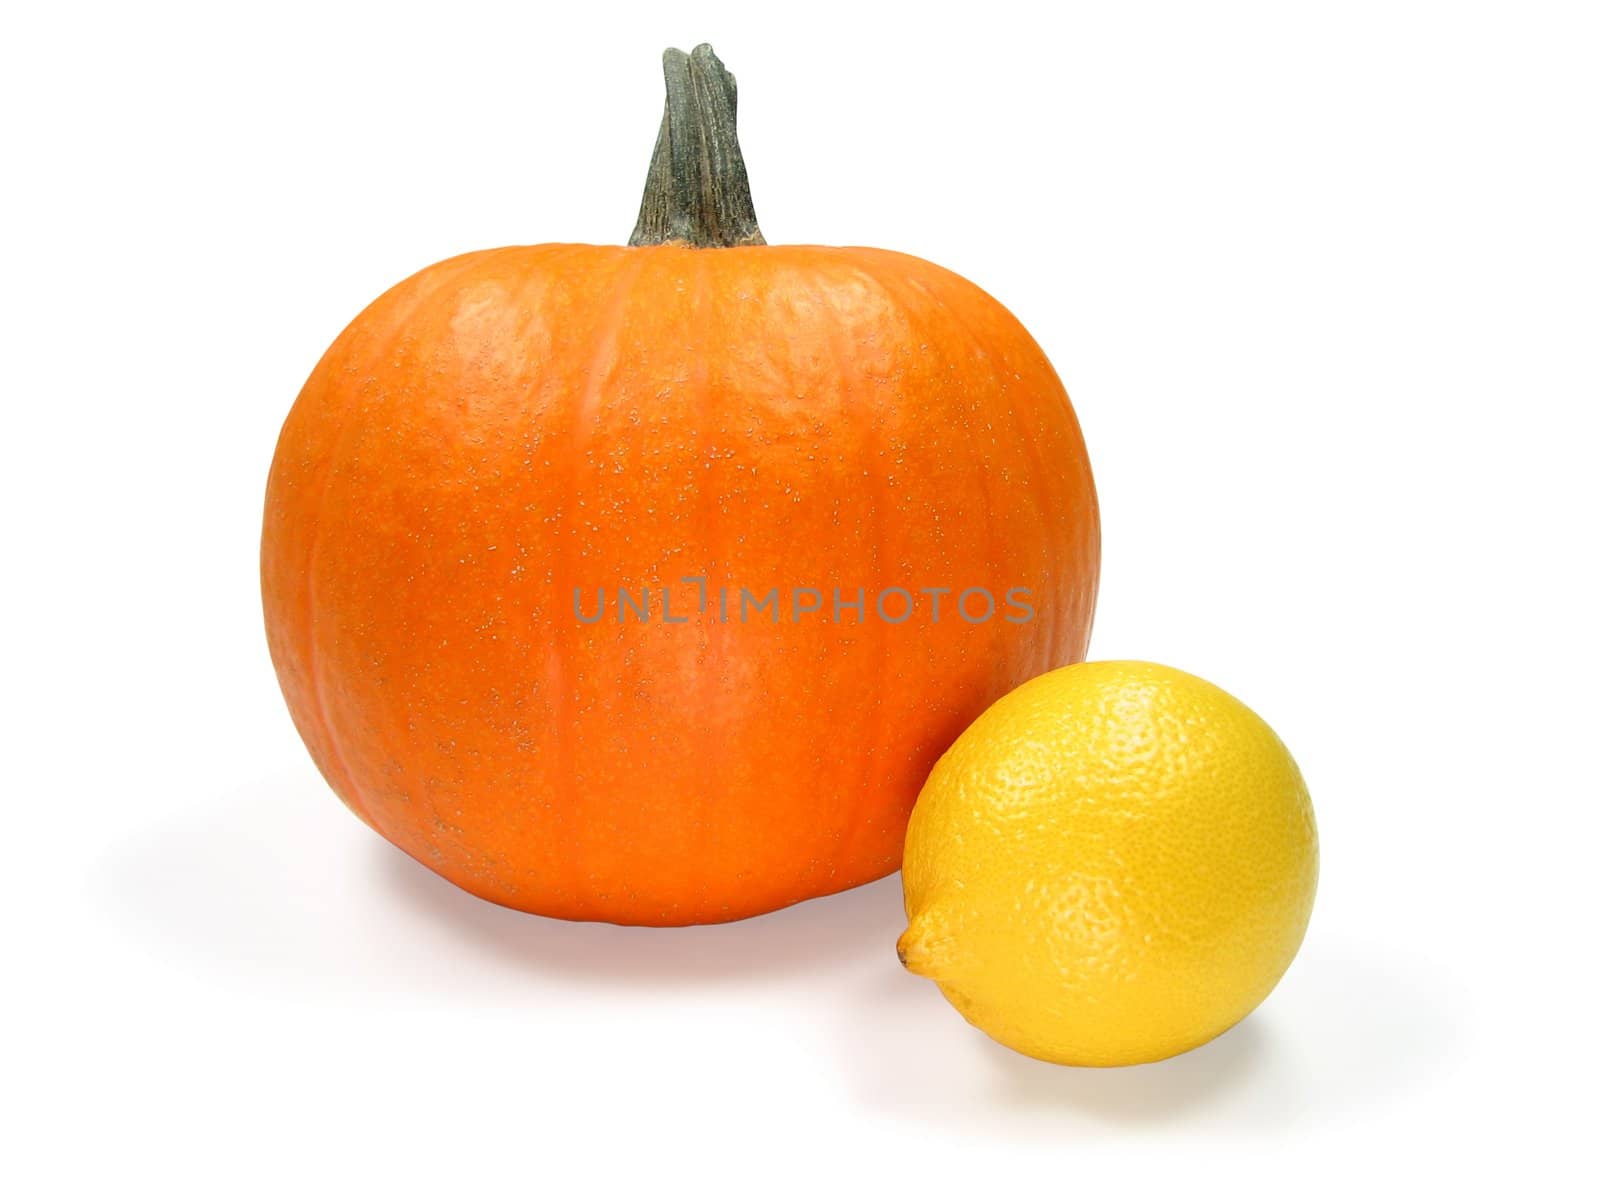 Pumpkin and lemon isolated on white. Contains clipping path.